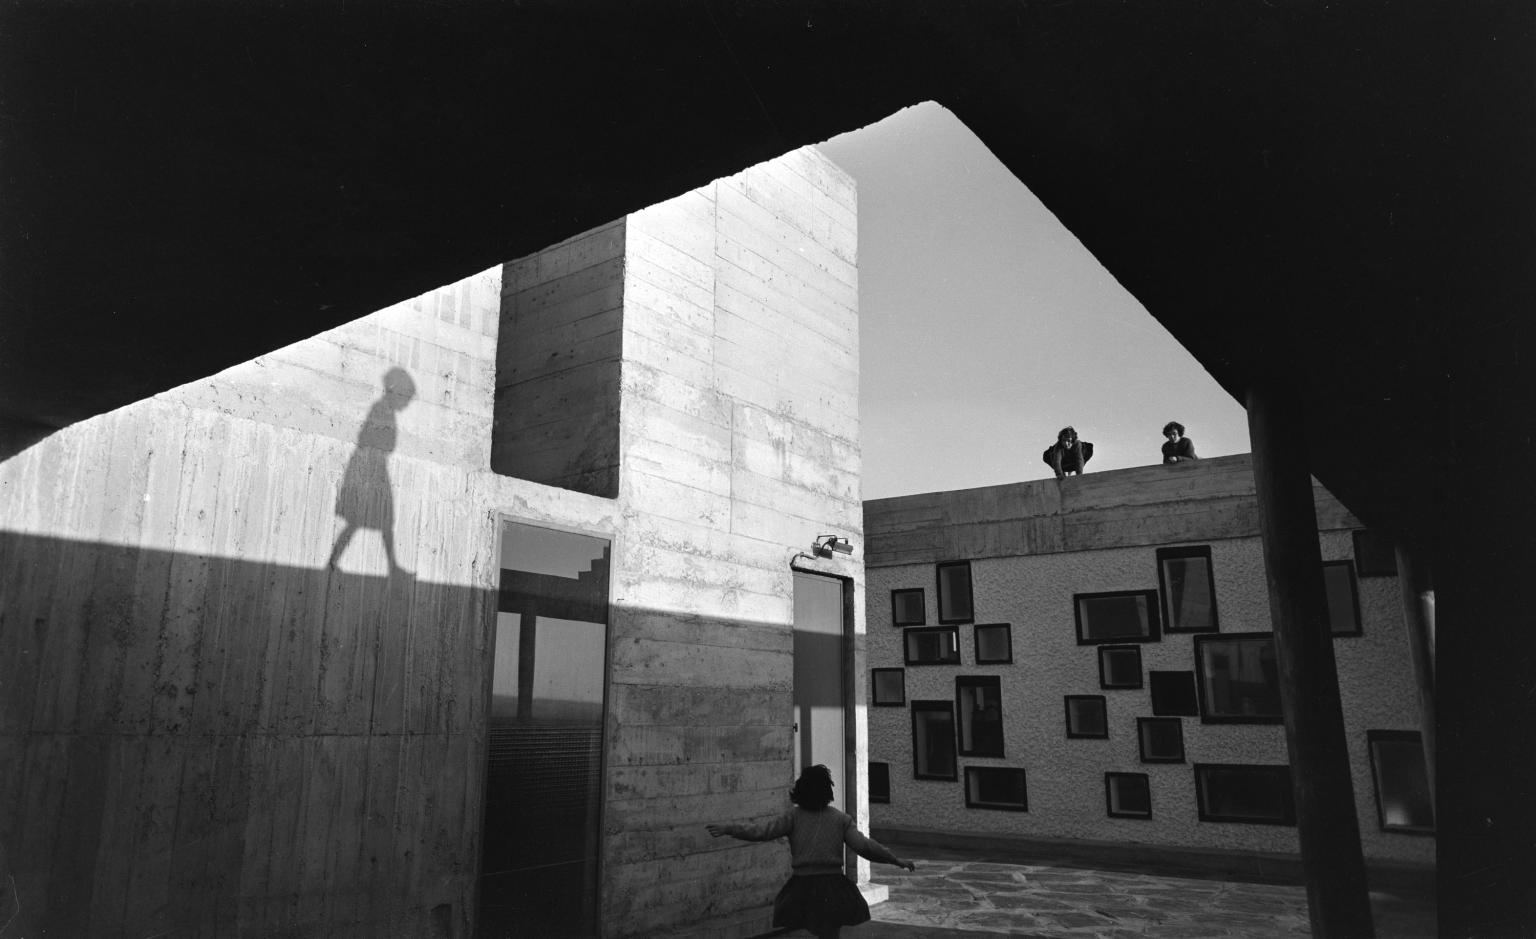 Photograph of exterior of modern apartment building taken from below an overhang showing a young woman walking toward a wall in front of her, and shadow of another woman reflected on the side of the building on the left.